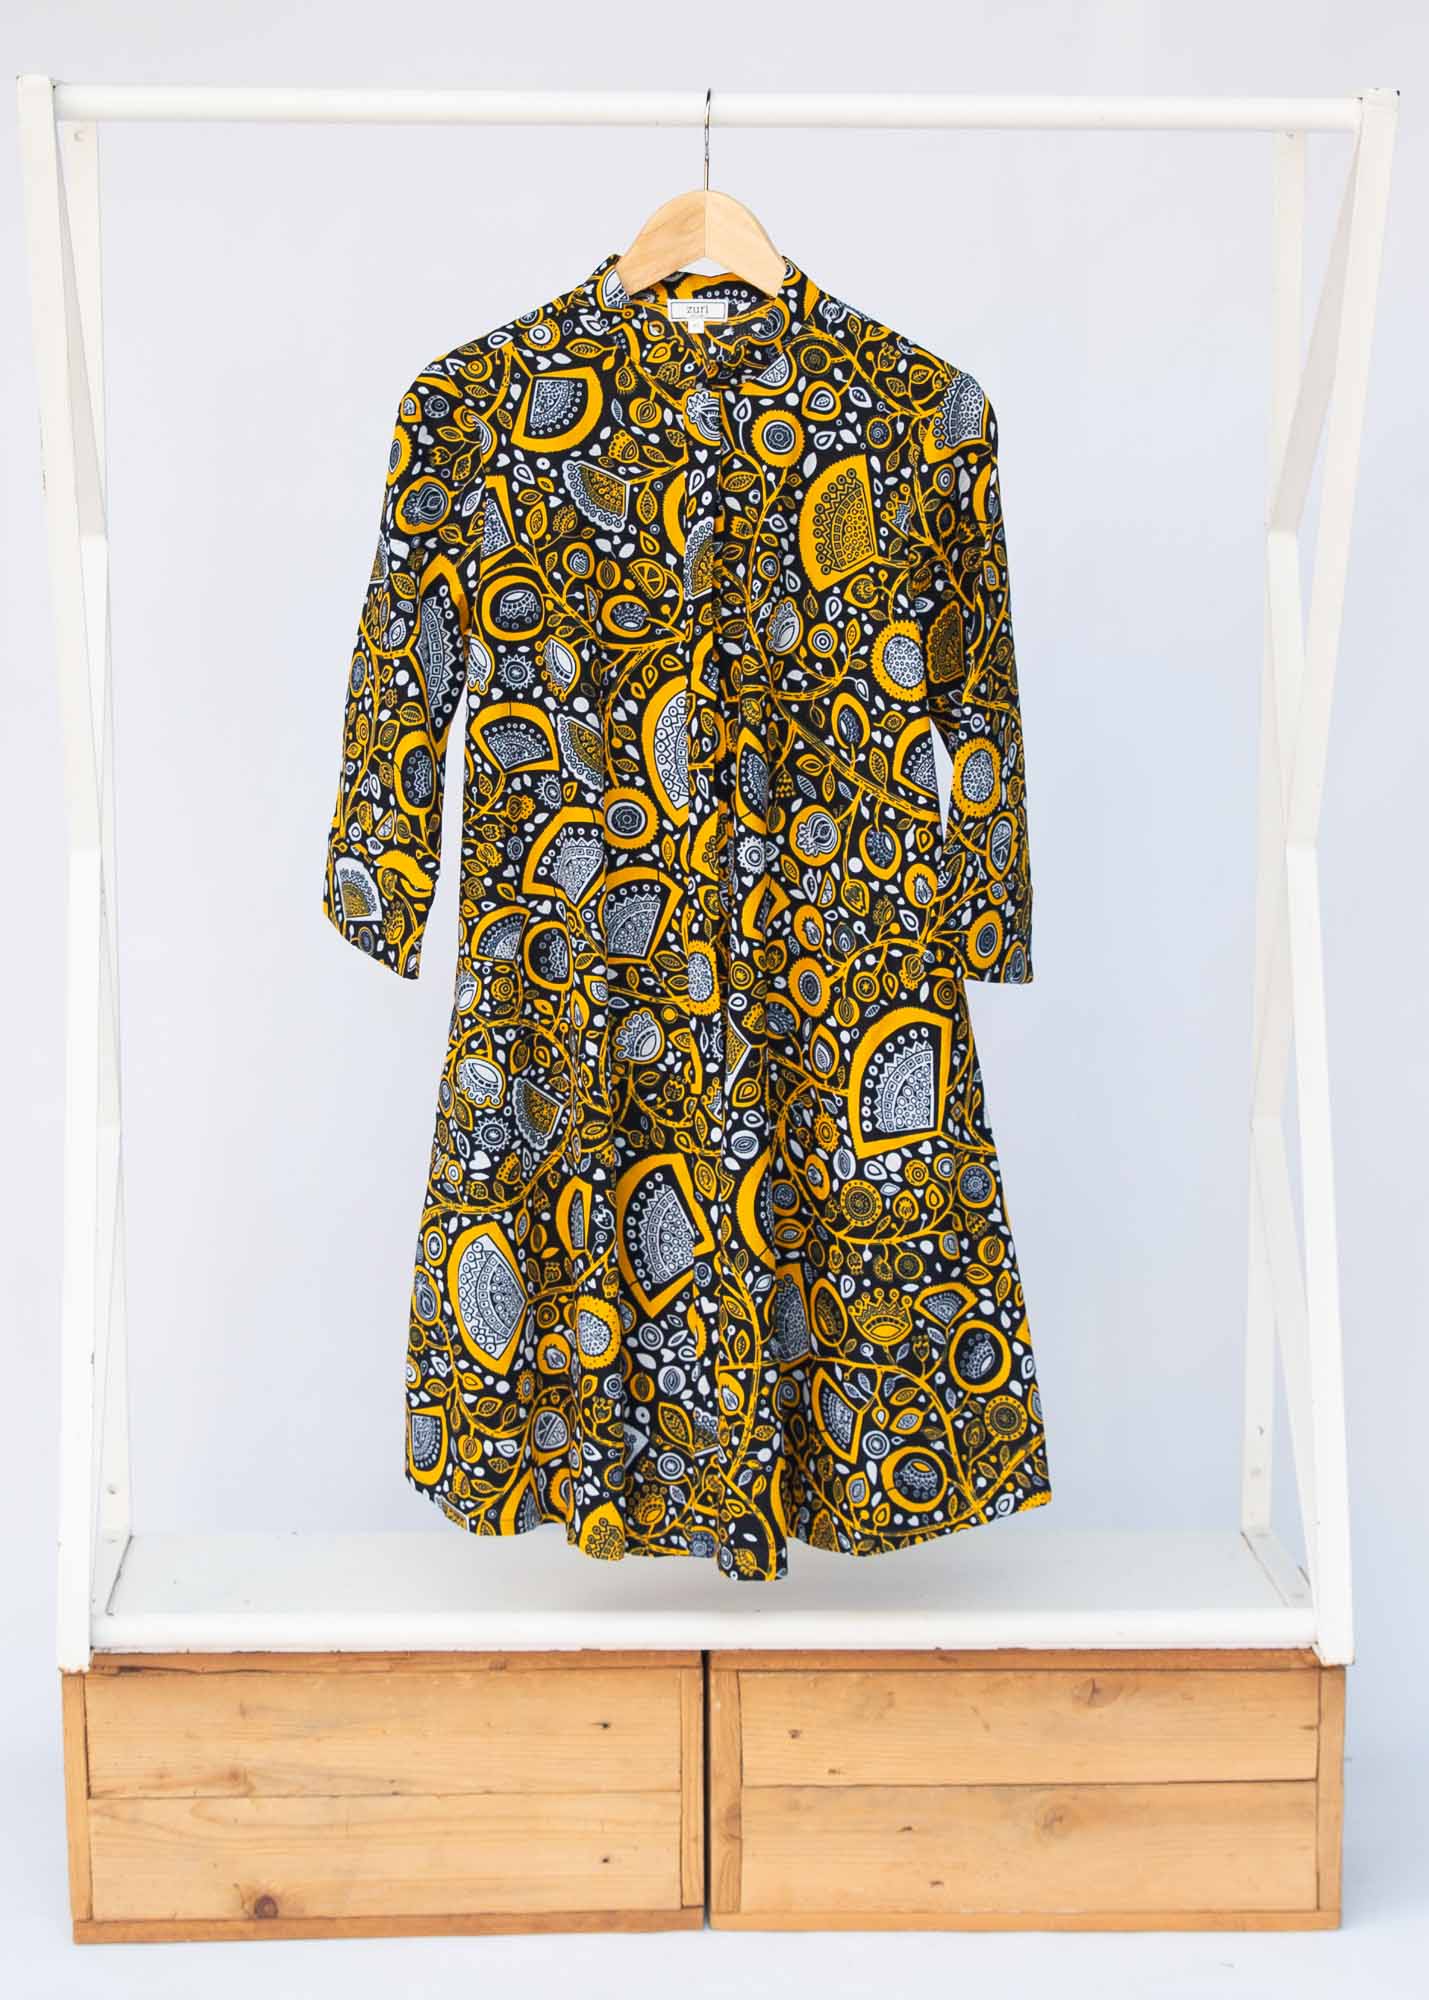 Display of black dress with white and yellow botanical print